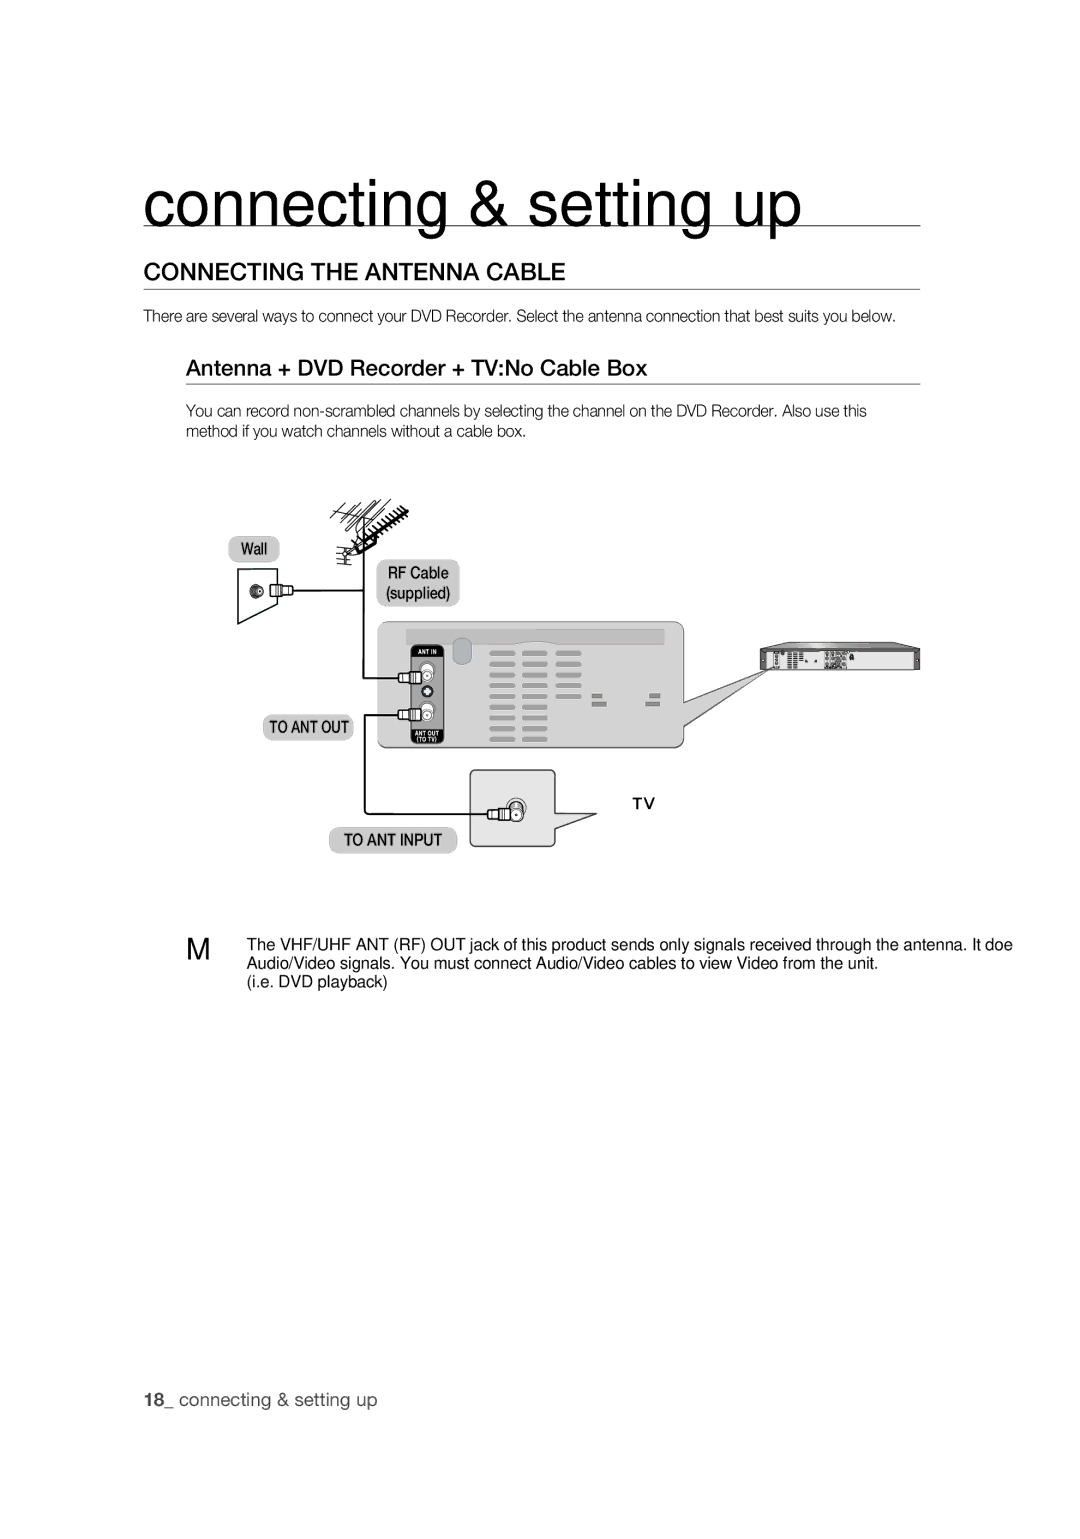 Samsung DVD-R170 user manual Connecting the Antenna Cable, Antenna + DVD Recorder + TVNo Cable Box, To ANT OUT To ANT Input 